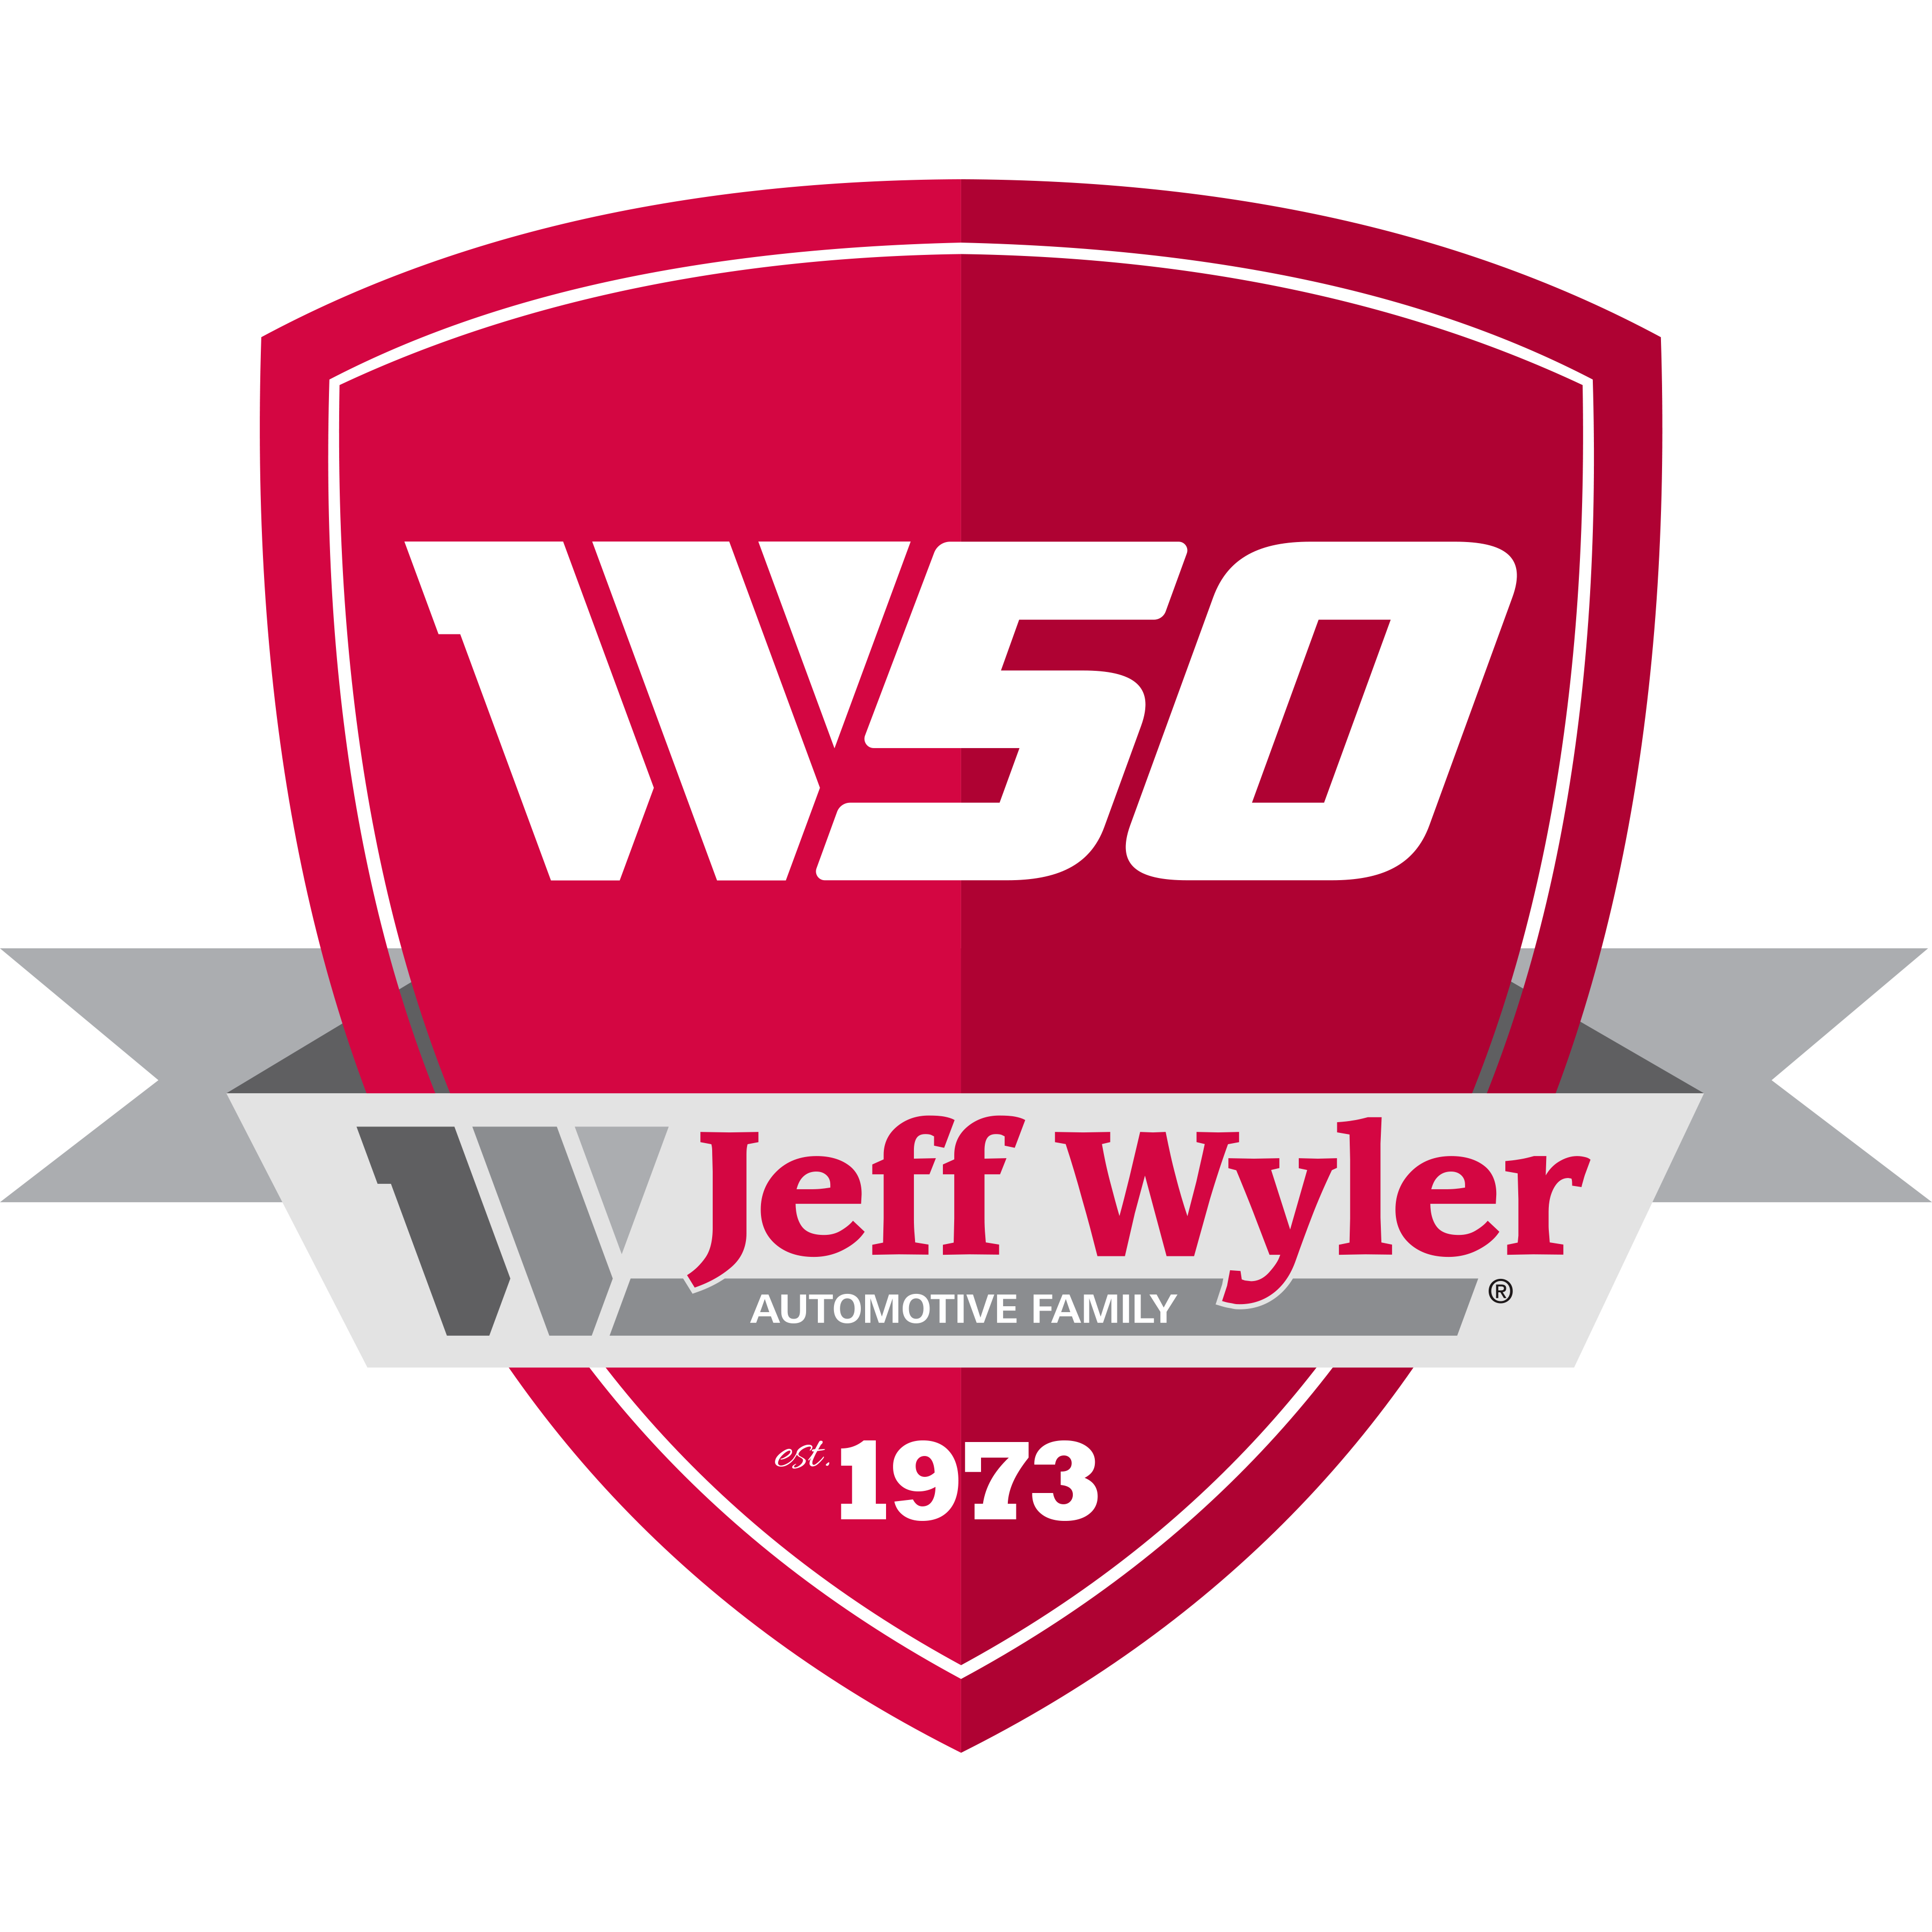 Jeff Wyler Springfield Chrysler Dodge Jeep RAM Parts - Springfield, OH 45504 - (937)525-4801 | ShowMeLocal.com